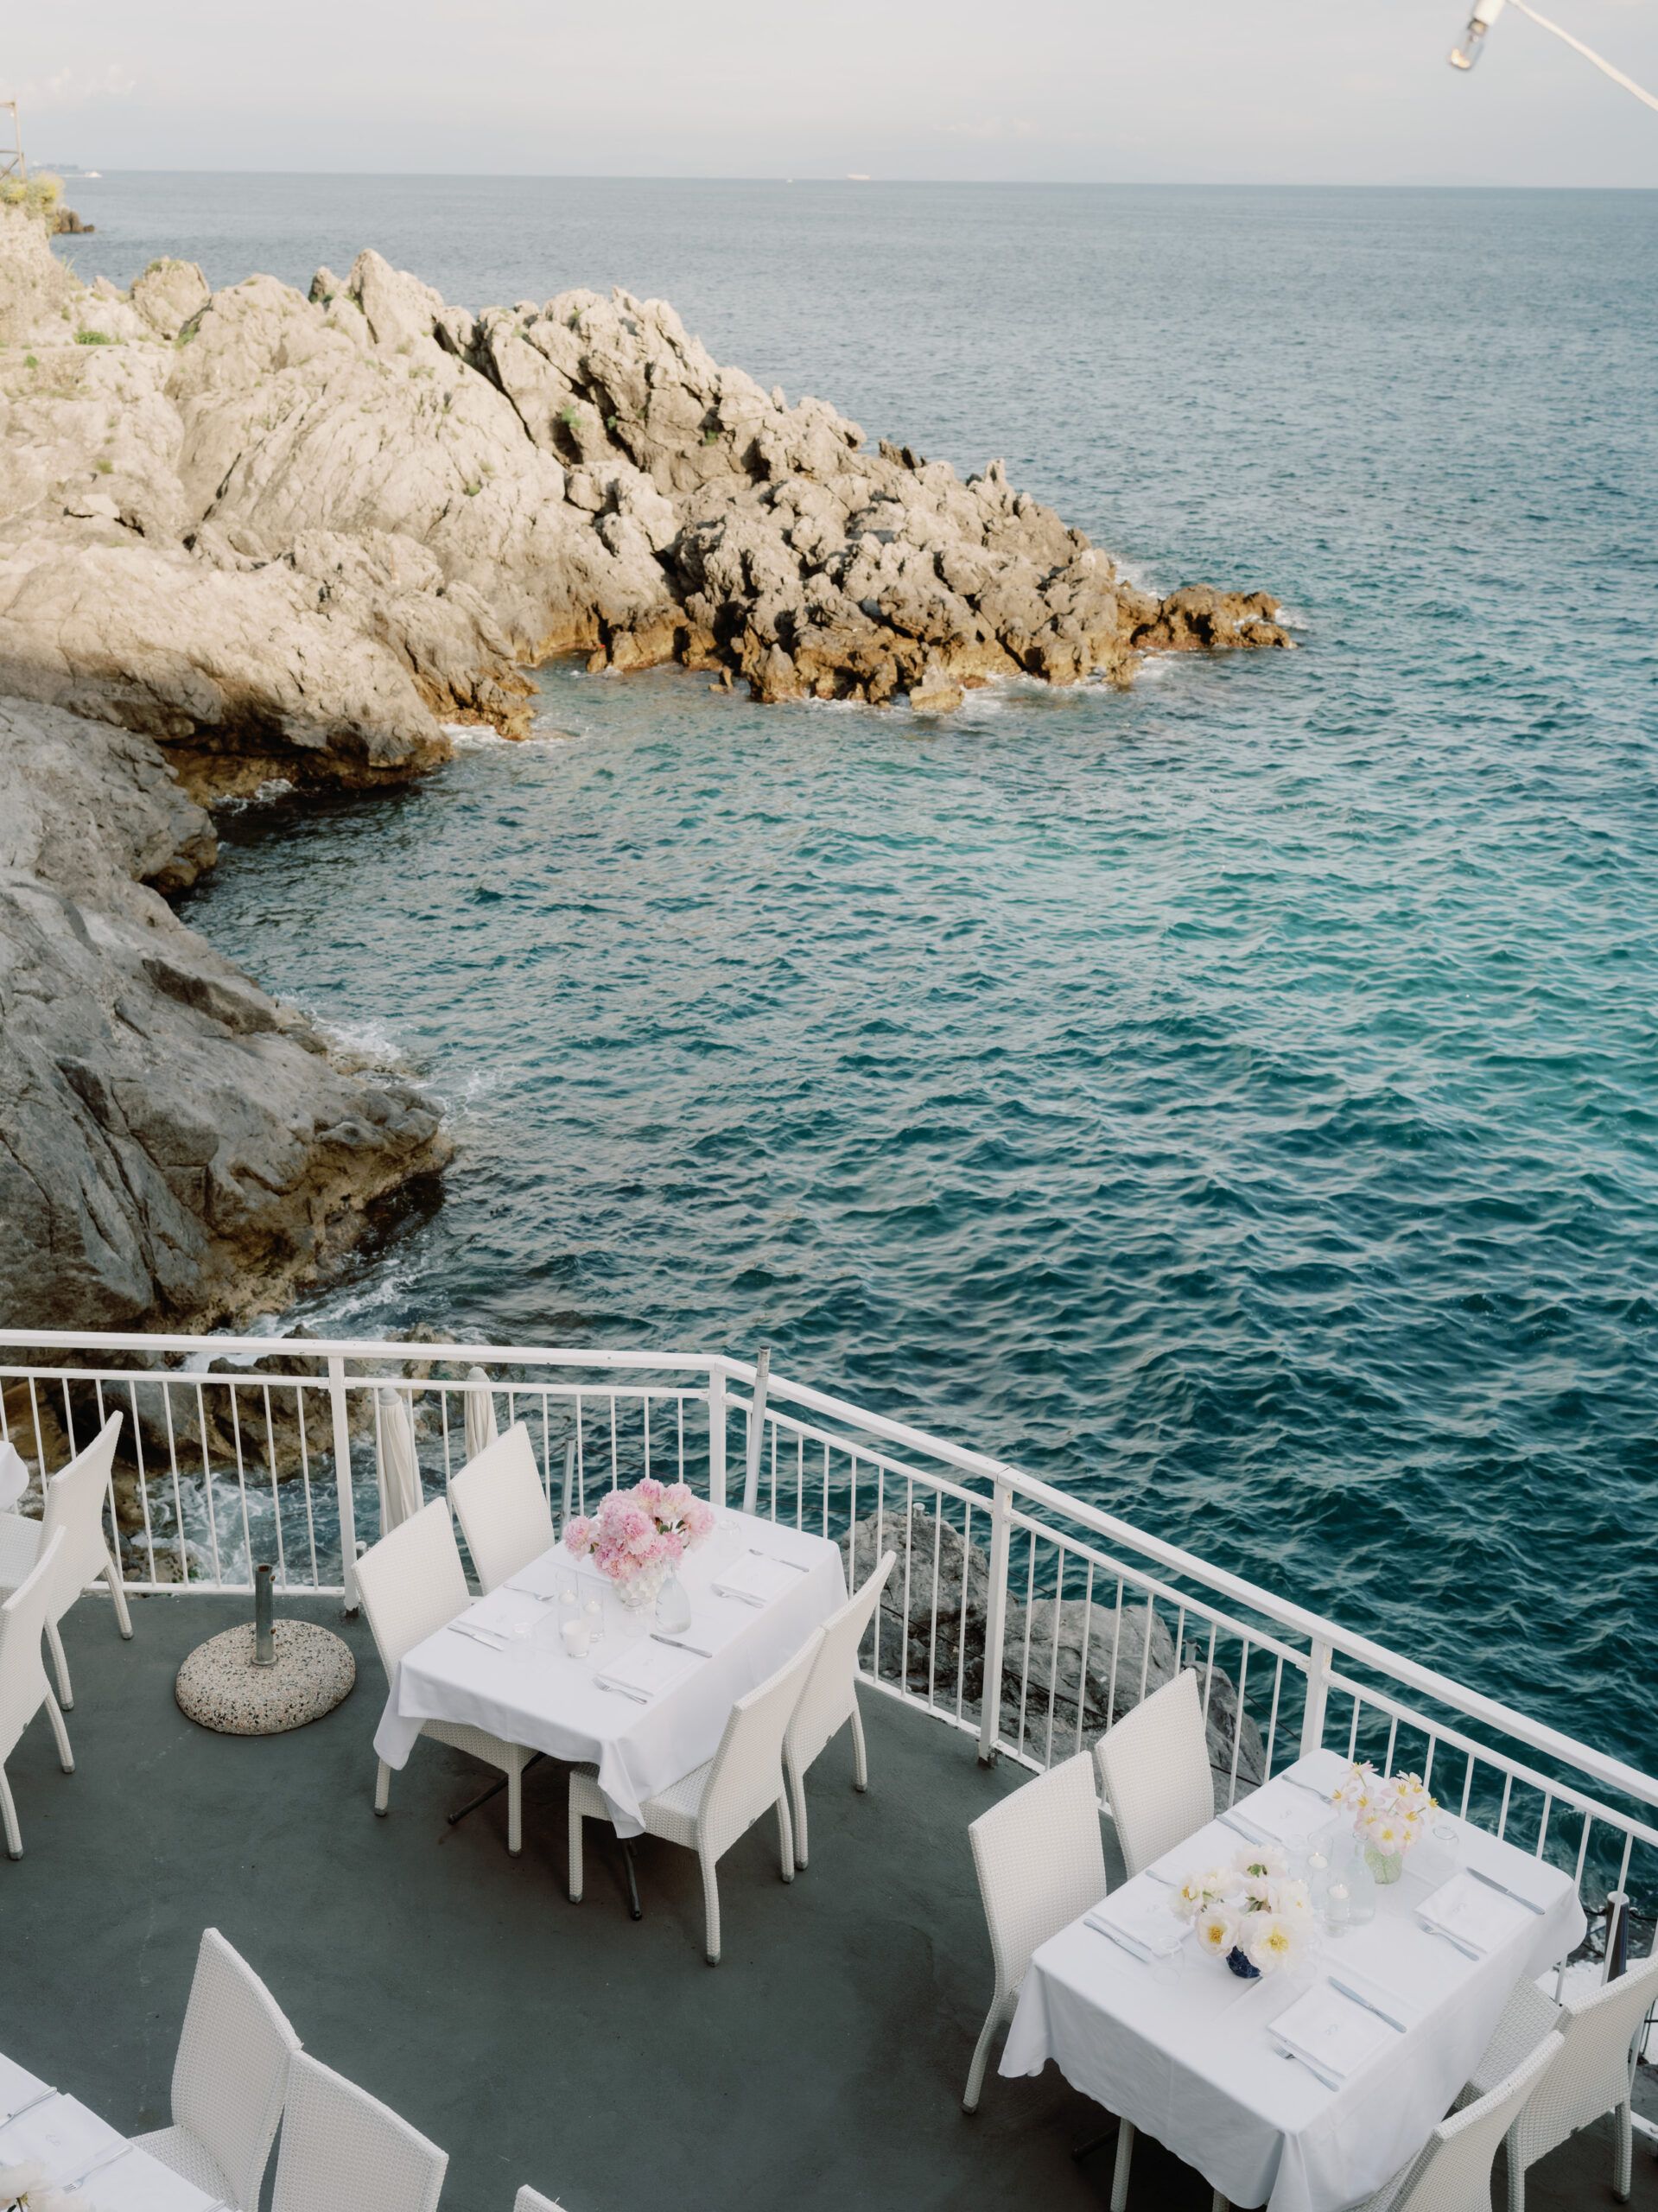 Editorial image of an outdoor table set-up on a terrace overlooking the sea. Image by Jenny Fu Studio